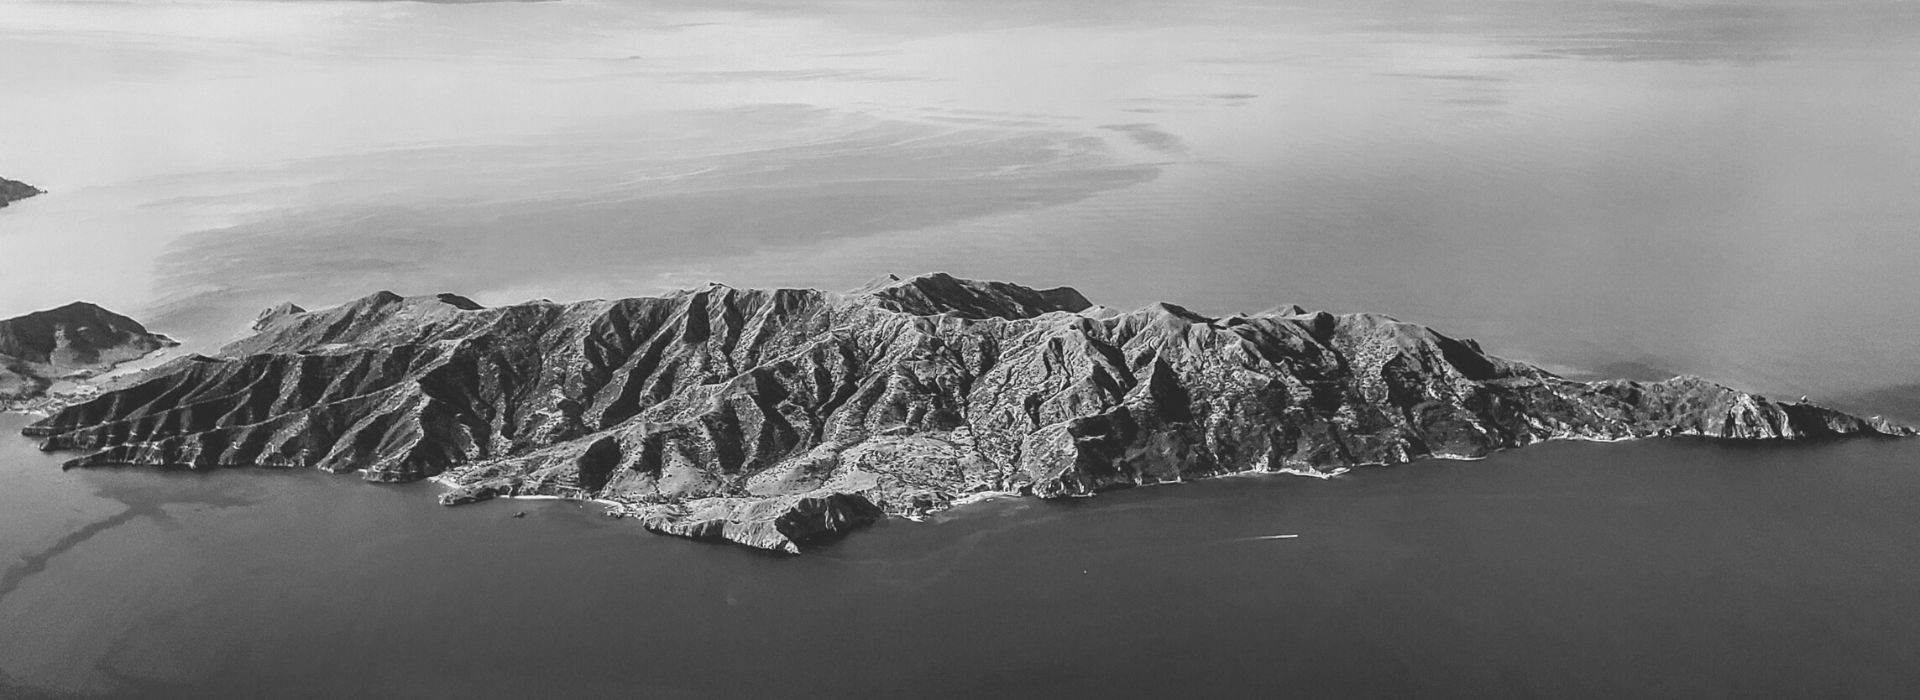 Black and white aerial view of Catalina Island